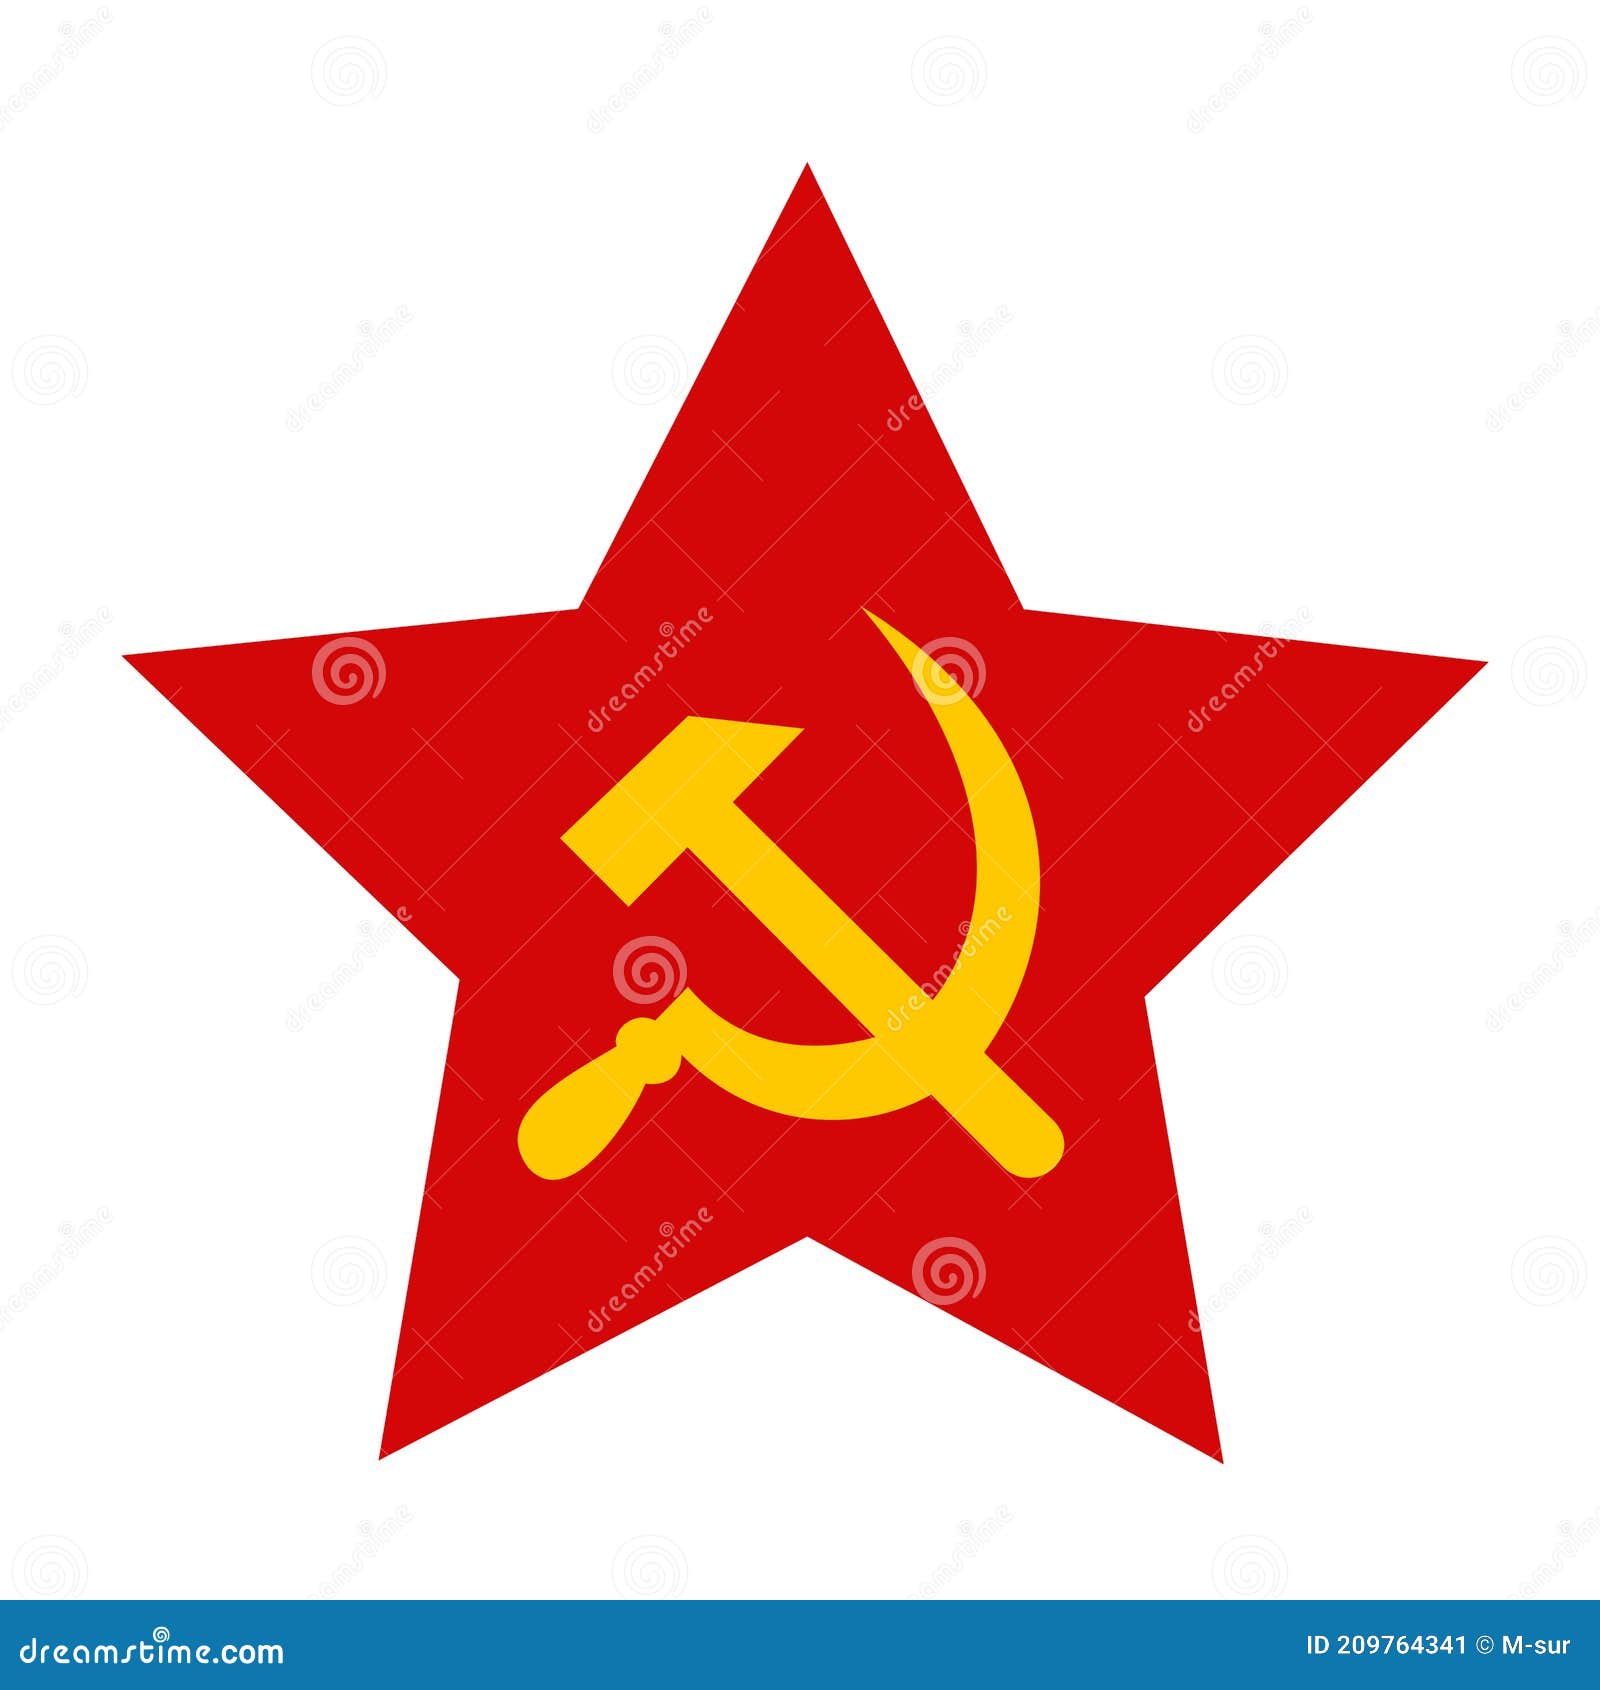 red star with hammer and sickle -  and sign of communism and socialism